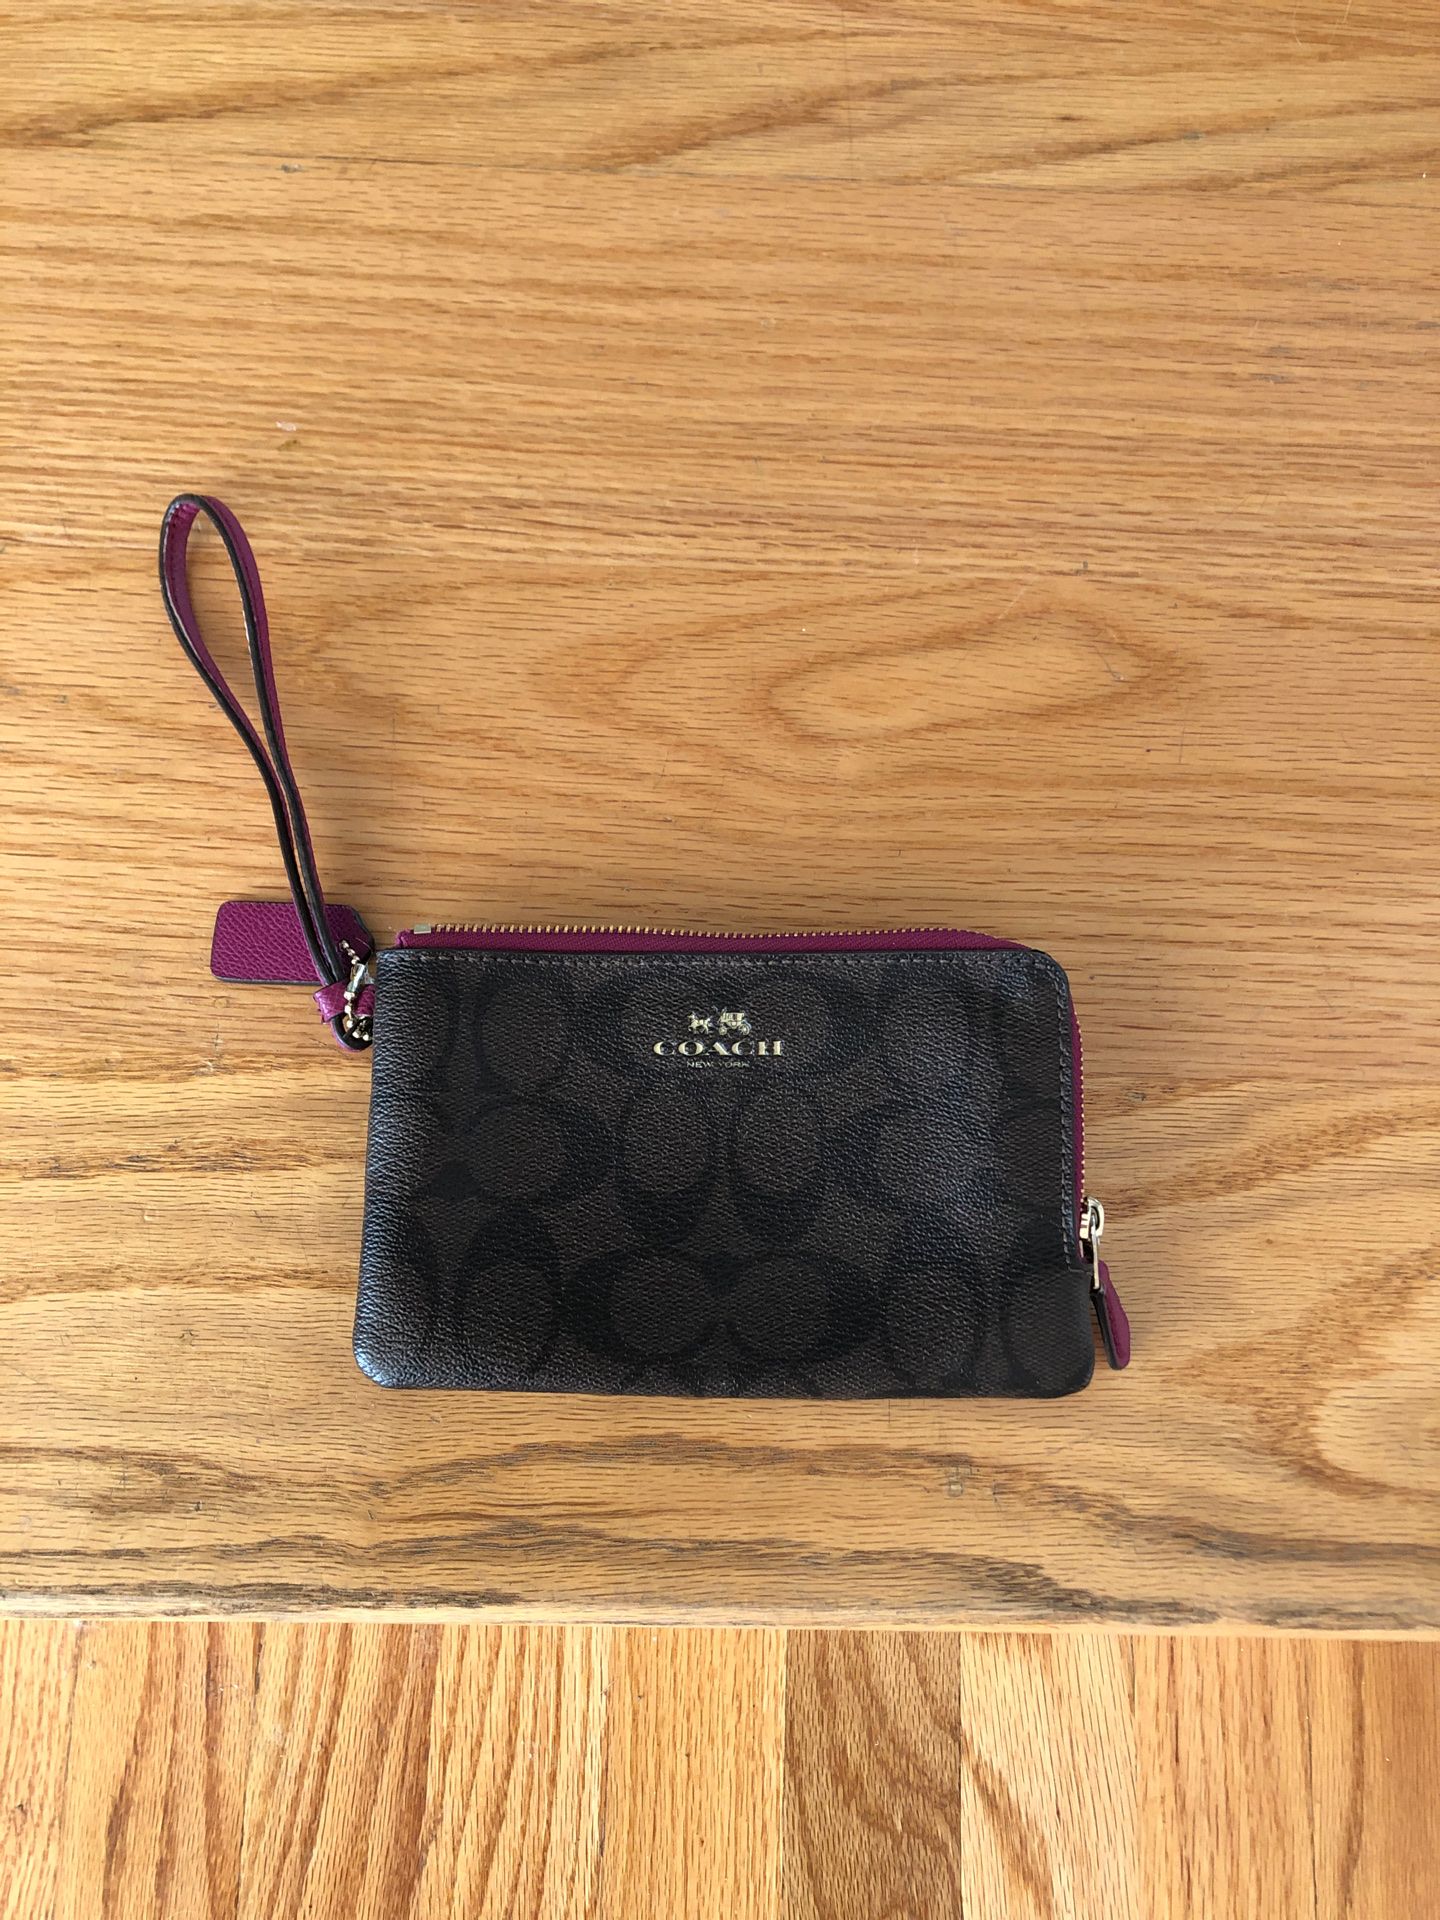 Coach wristlet ... never used! Paid $80. Asking $30